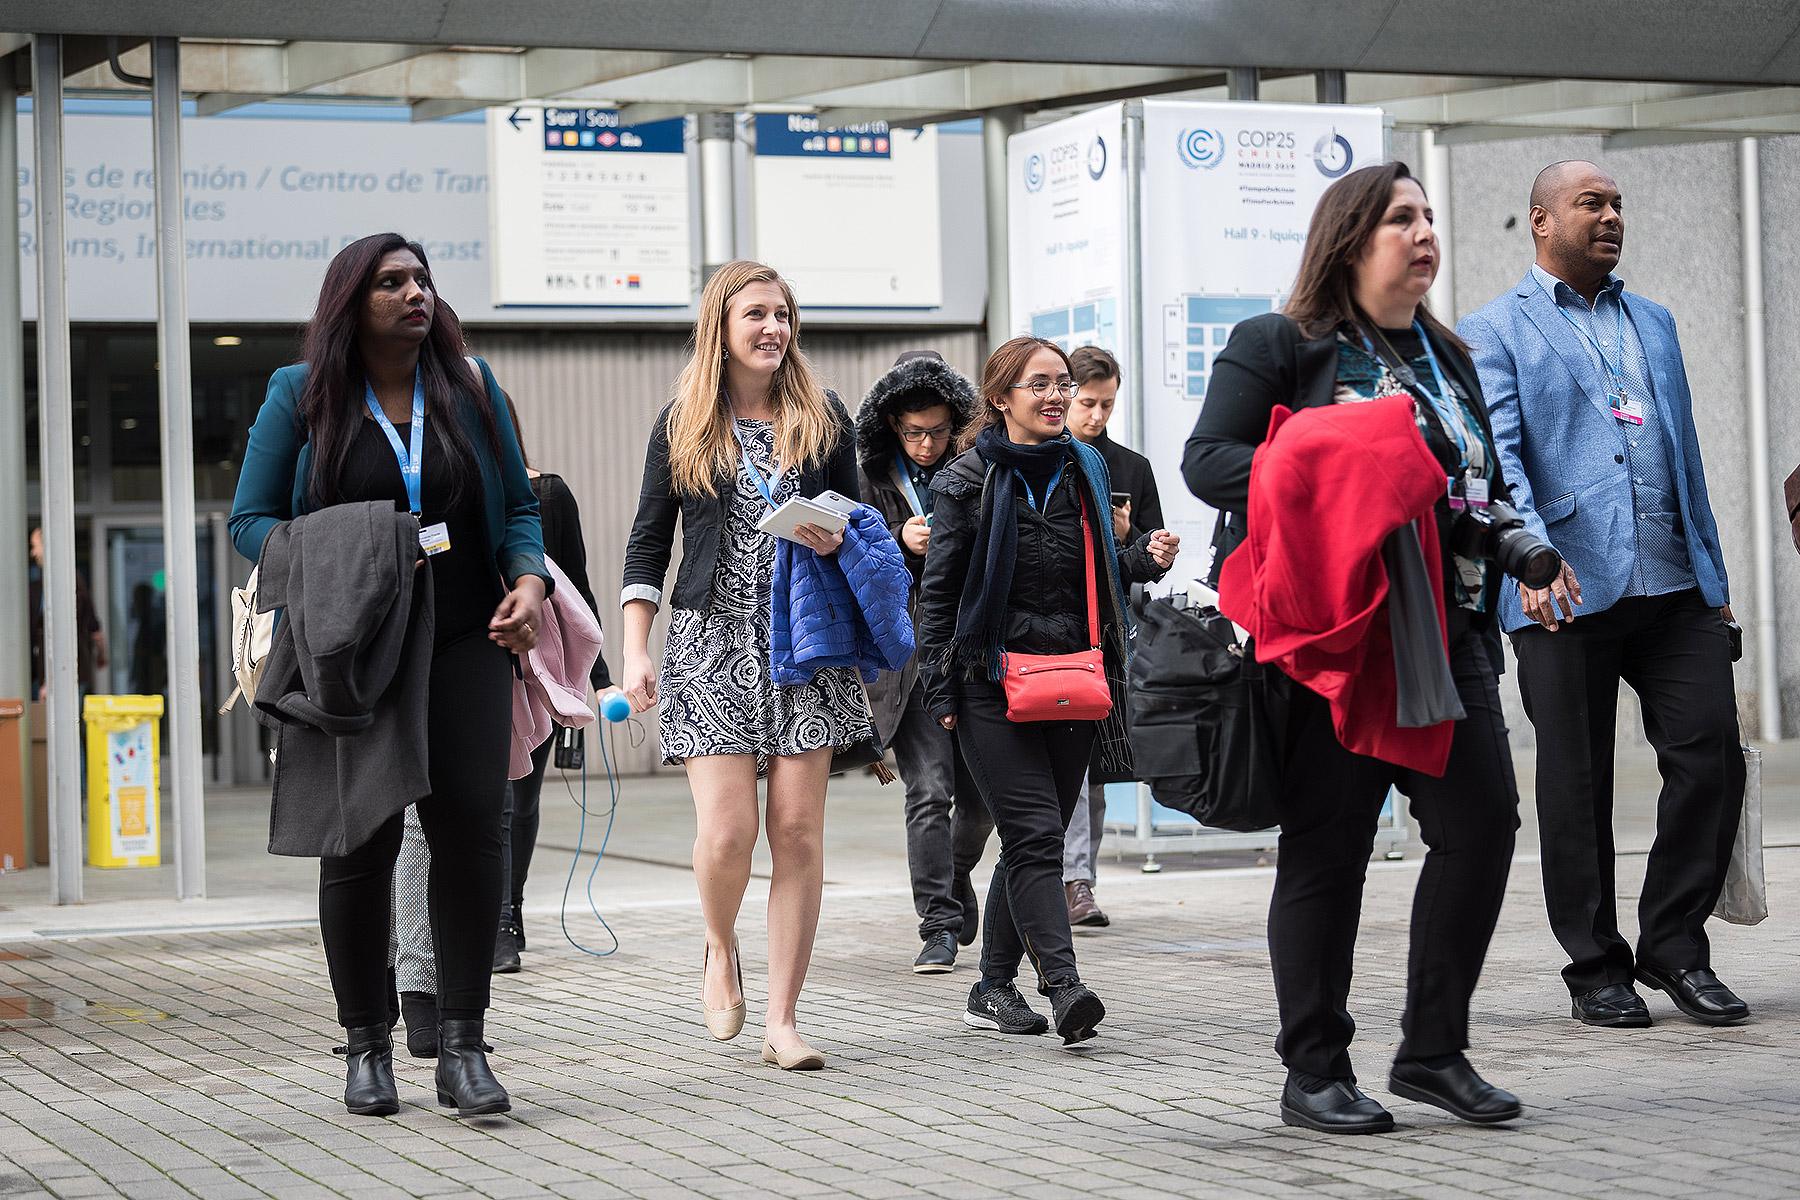  LWF Secretary for Youth Ms Pranita Biswasi (left) and other members of the LWF delegation walk toward the plenary hall on day one of COP 25 in Madrid.  LWF/Albin Hillert    